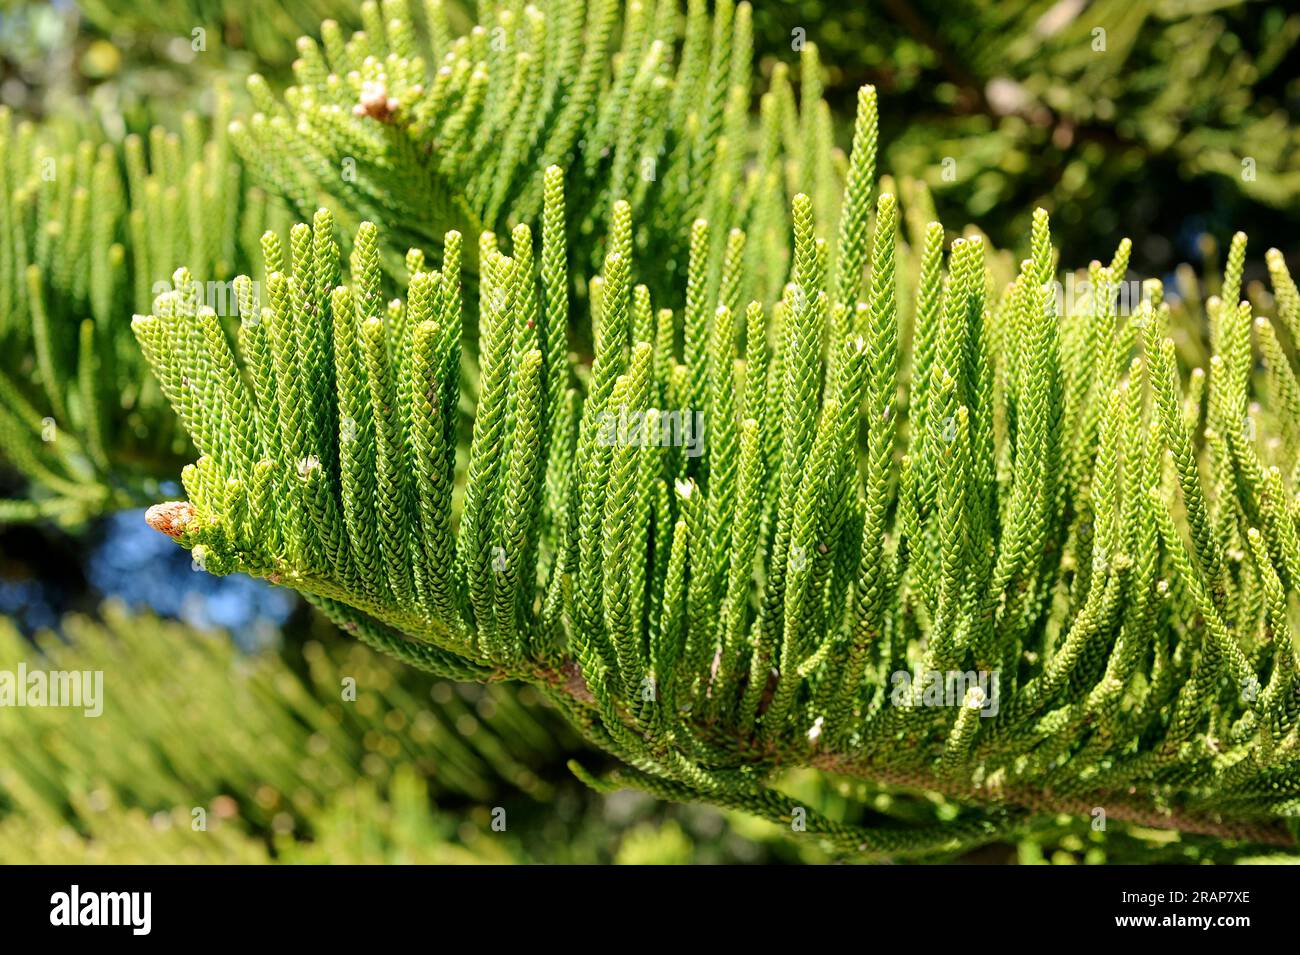 Norfolk island pine or star pine (Araucaria heterophylla or A. excelsa) is an endemic tree native to Norfolk Island in Pacific Ocean. Leaves detail. P Stock Photo